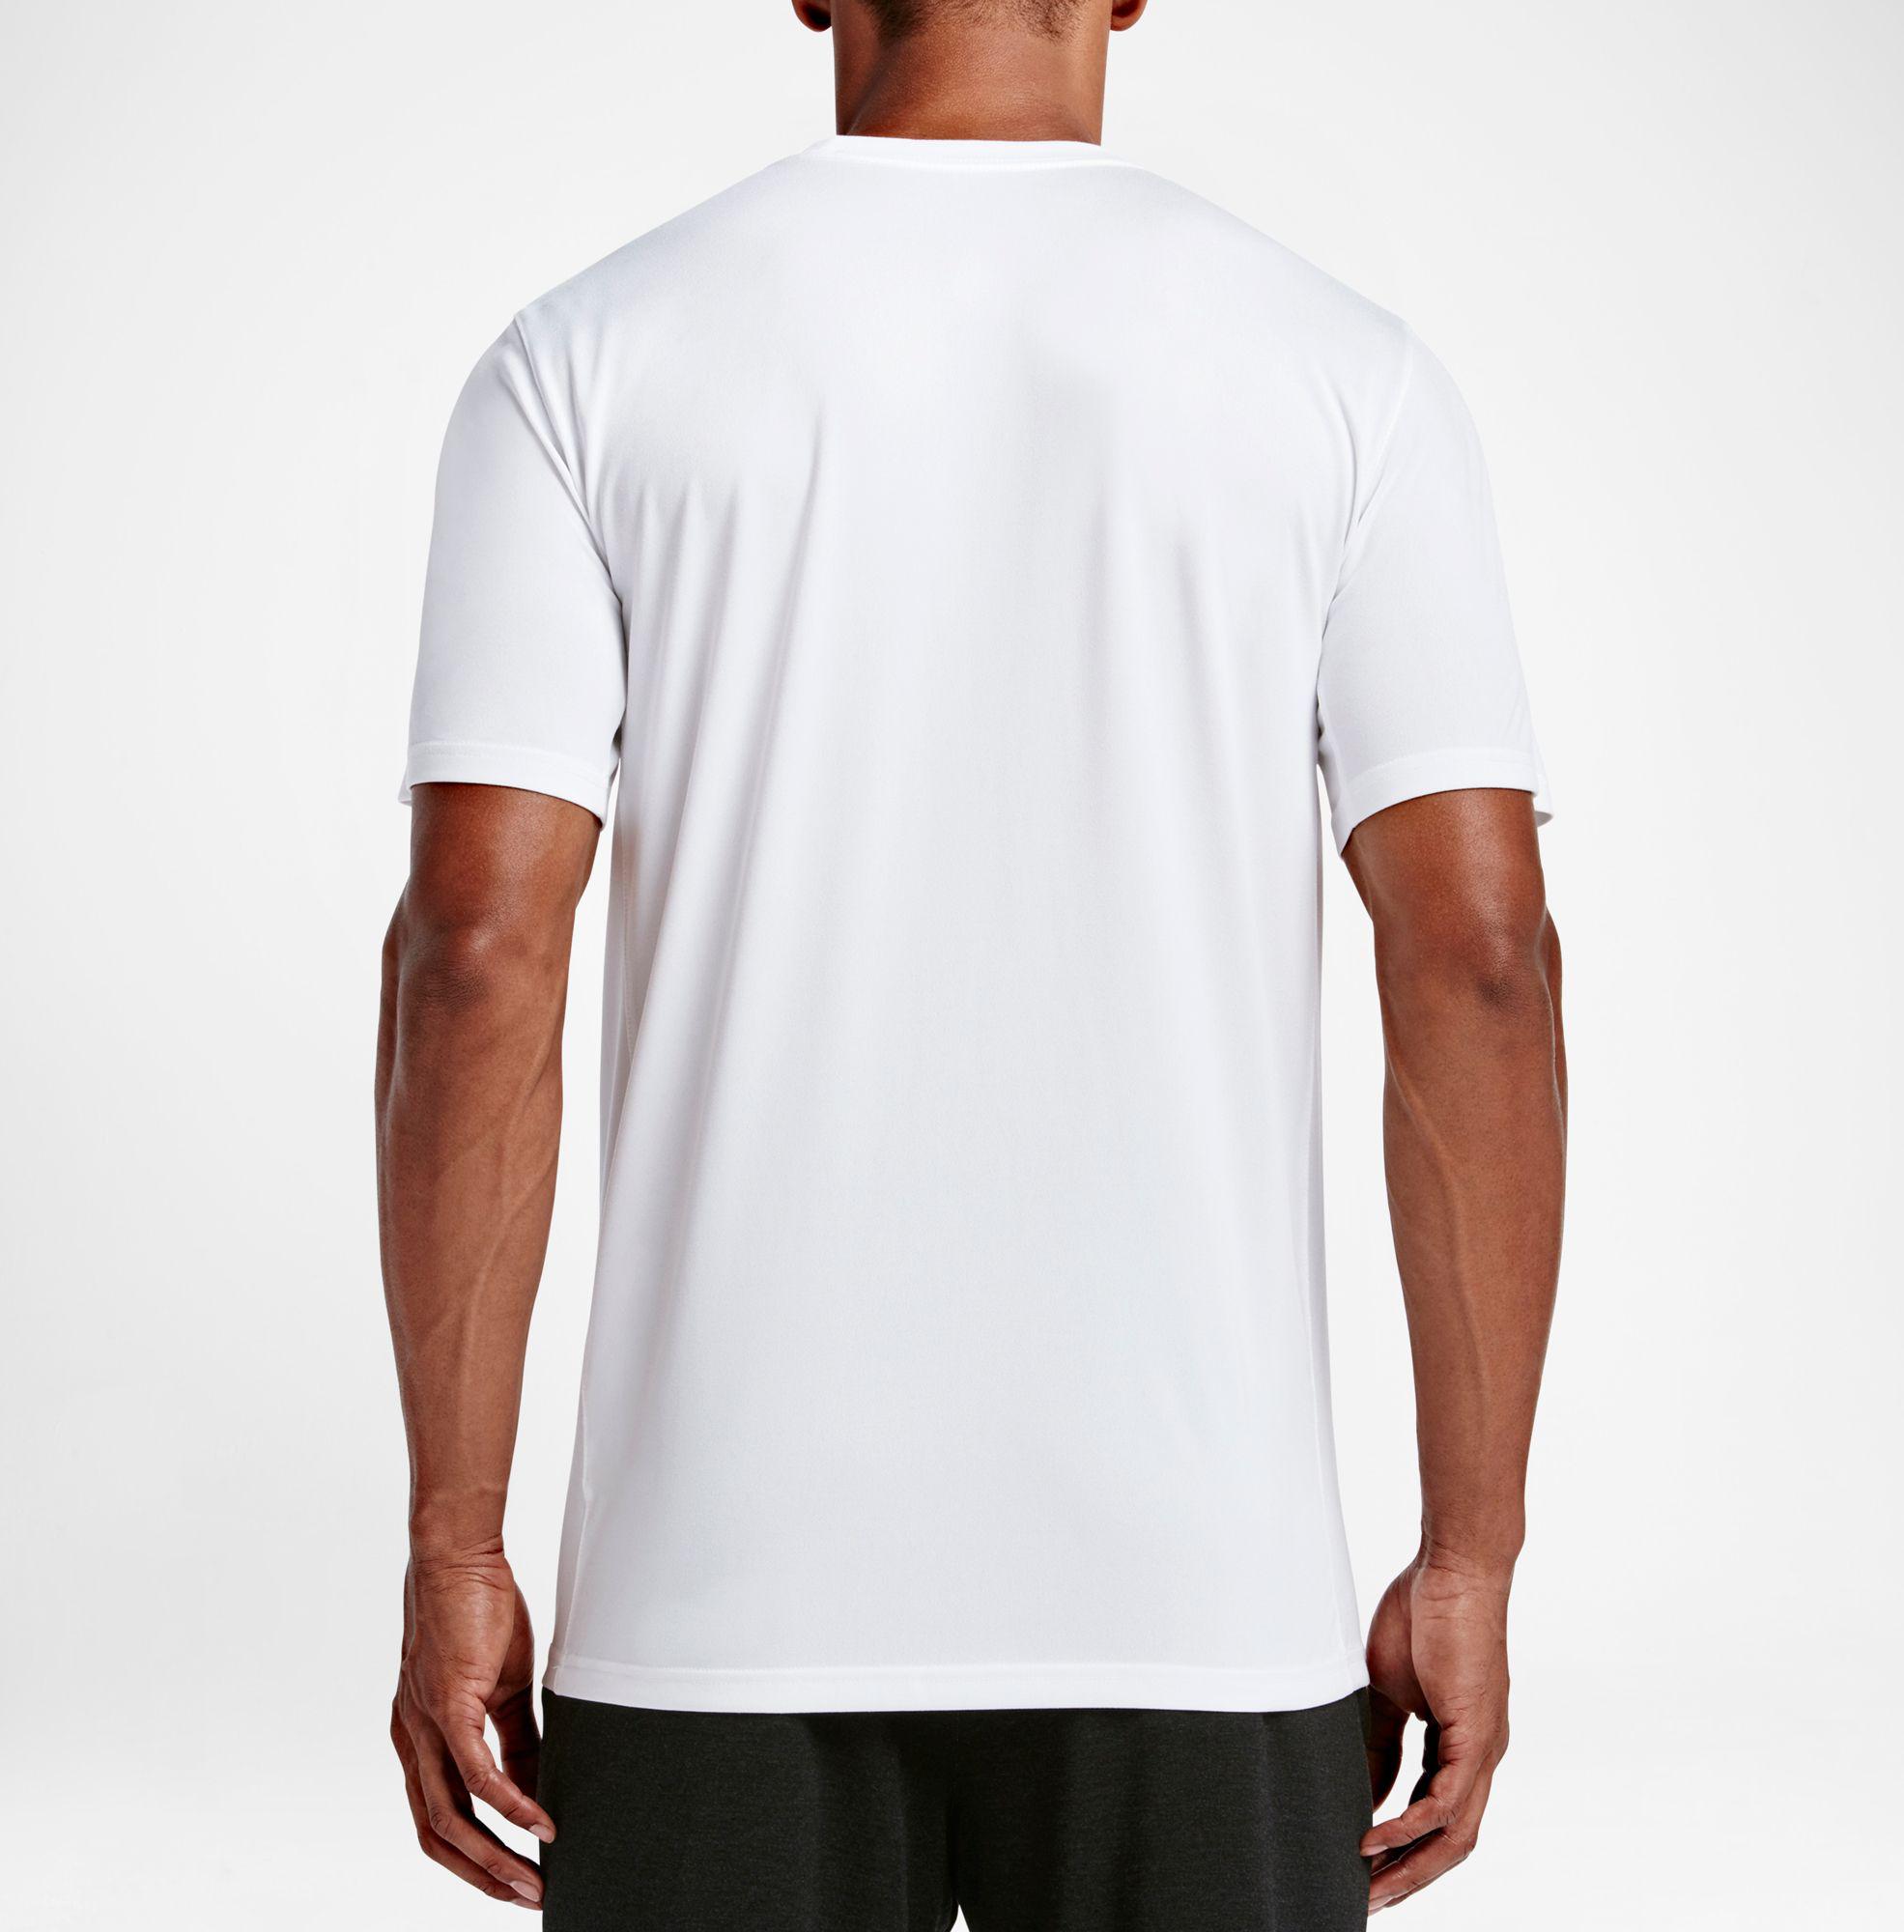 Nike Synthetic Legend 2.0 T-shirt in White for Men - Lyst